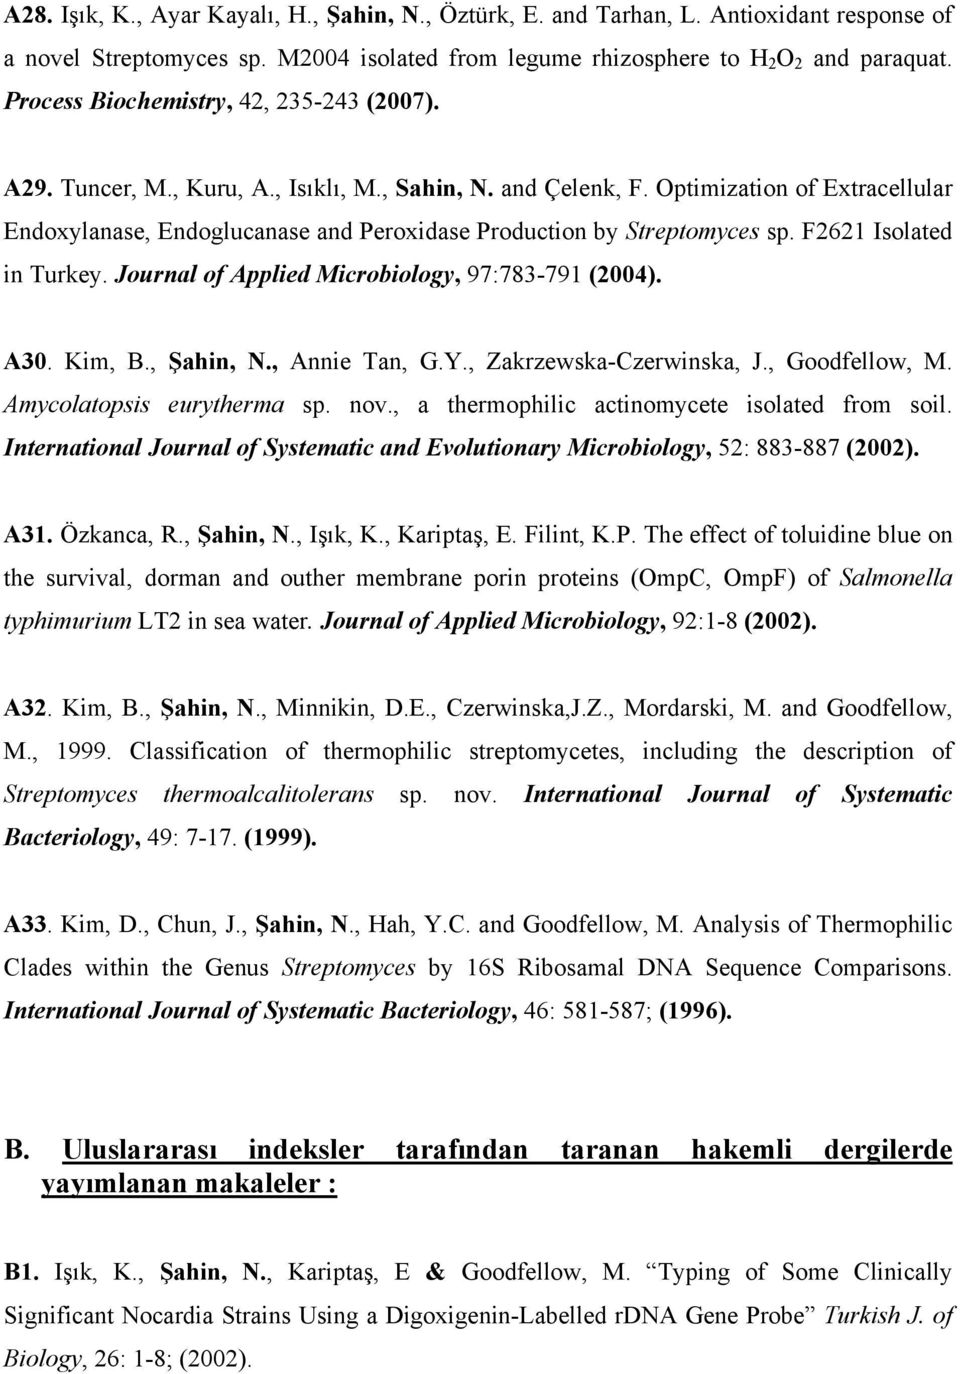 Optimization of Extracellular Endoxylanase, Endoglucanase and Peroxidase Production by Streptomyces sp. F2621 Isolated in Turkey. Journal of Applied Microbiology, 97:783-791 (2004). A30. Kim, B.